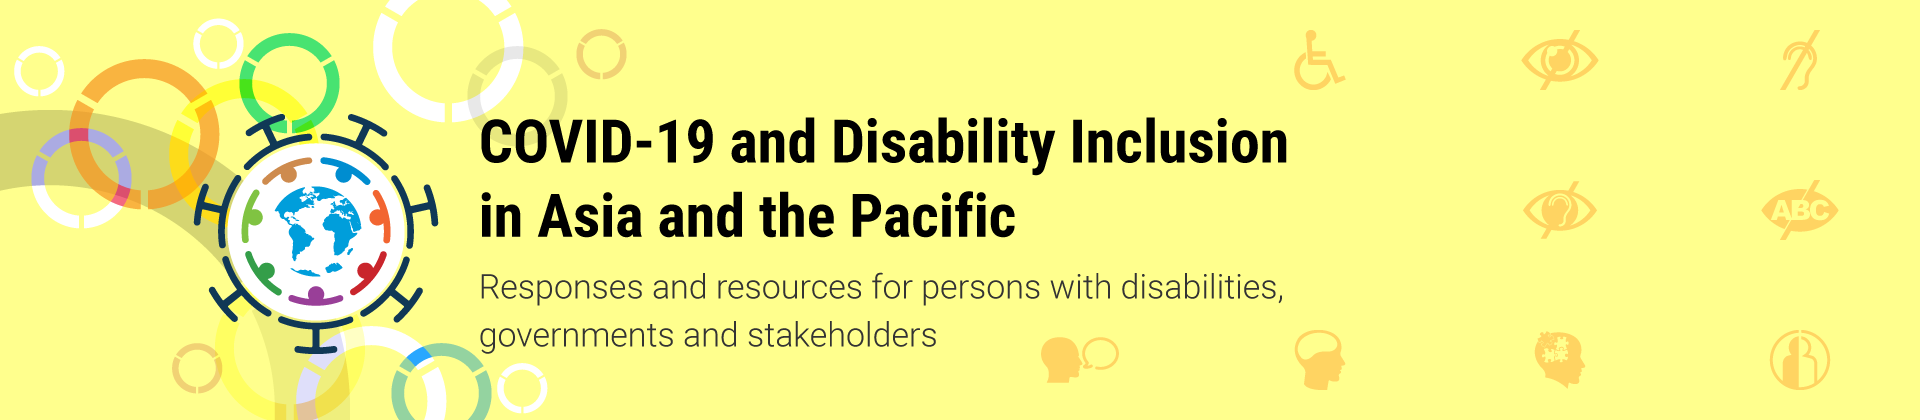 Banner of the web page, with text that reads “COVID-19 and Disability Inclusion in Asia and the Pacific. Responses and resources for persons with disabilities, governments and stakeholders”. Several icons on COVID-19 and persons with diverse disabilities embedded in the yellow background.